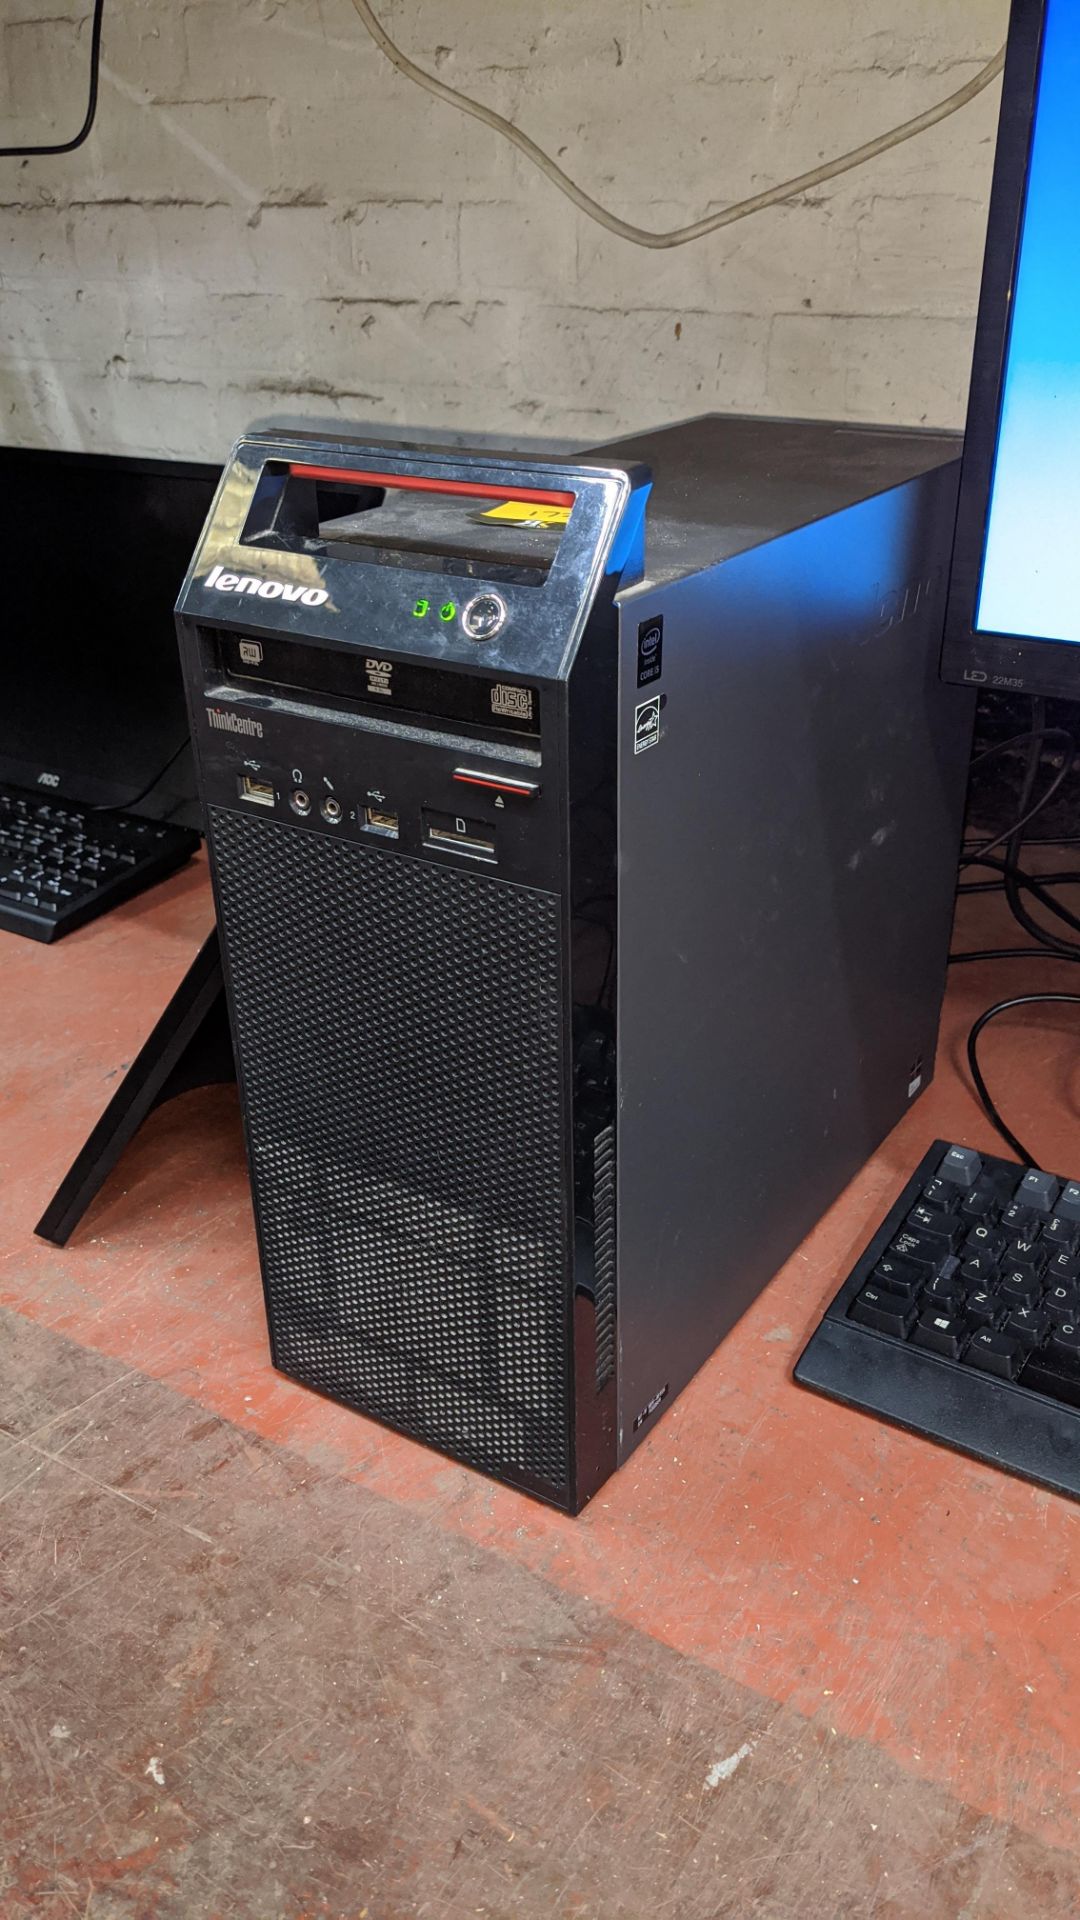 Lenovo desktop computer with Intel Core i5-4460S CPU @ 2.9GHz, 4Gb RAM, 500Gb HDD including - Image 4 of 6